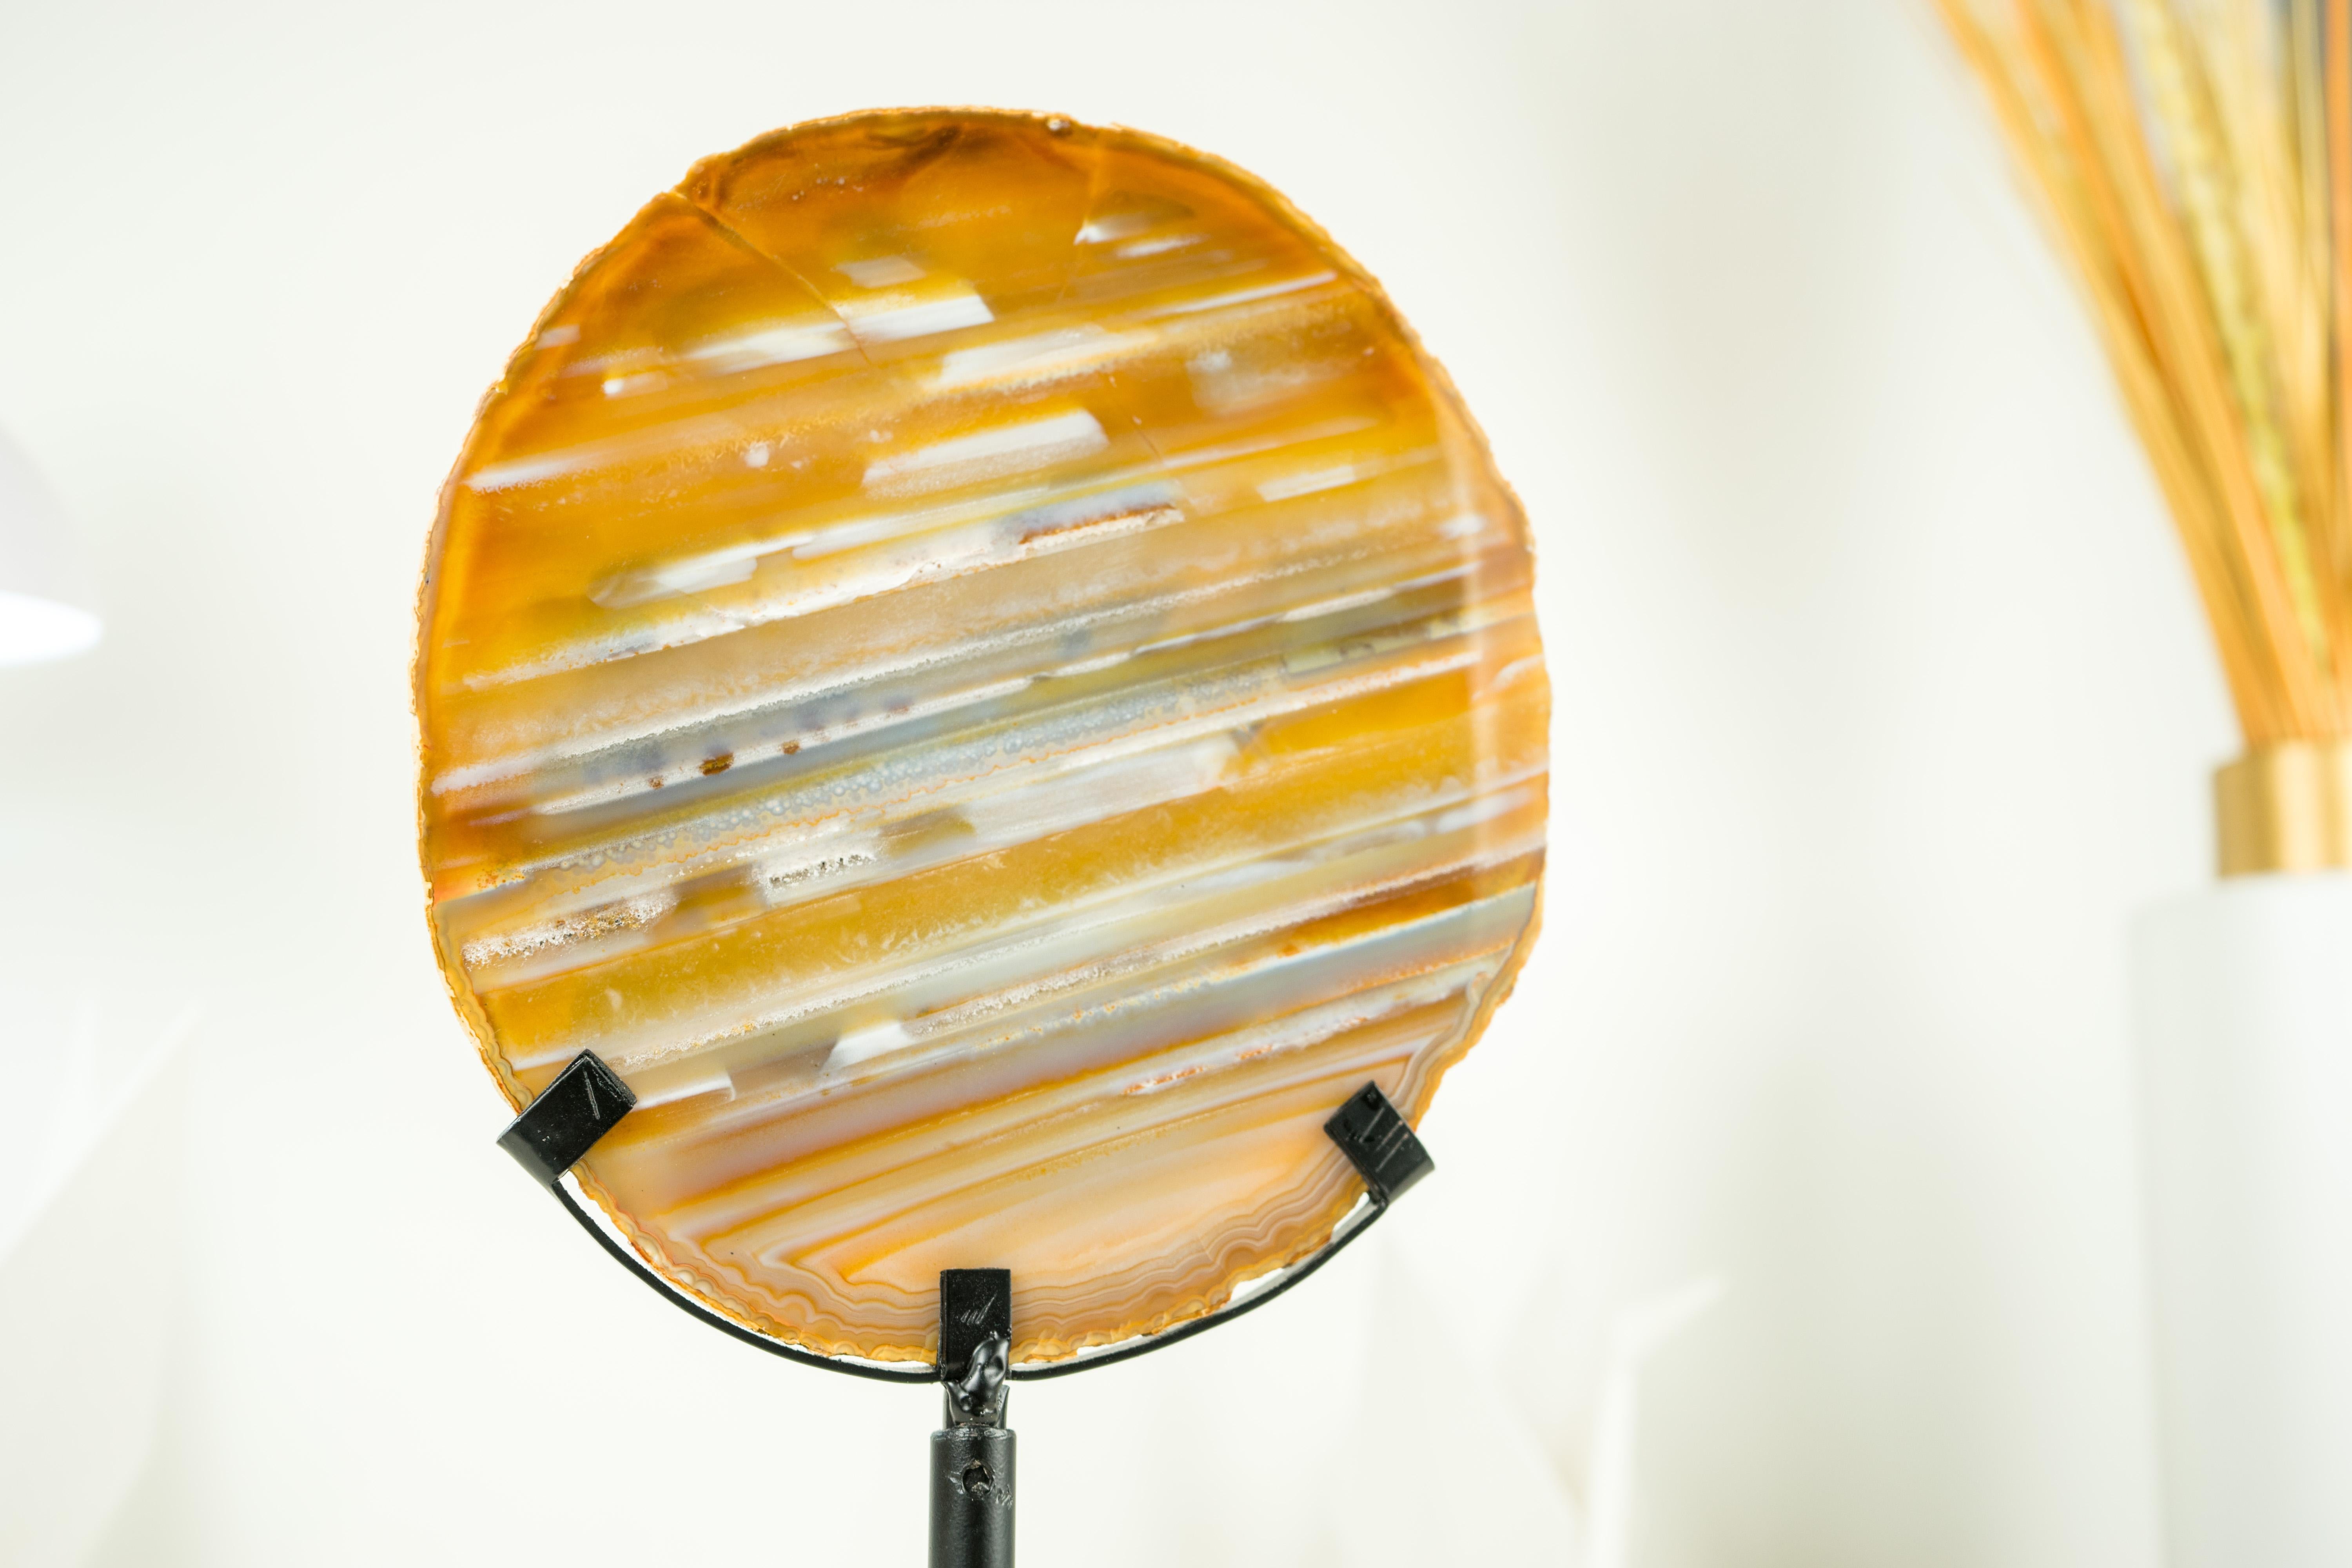 Brazilian Super Rare Water-Line Agate Slice with Natural Yellow, Blue and White Colors  For Sale